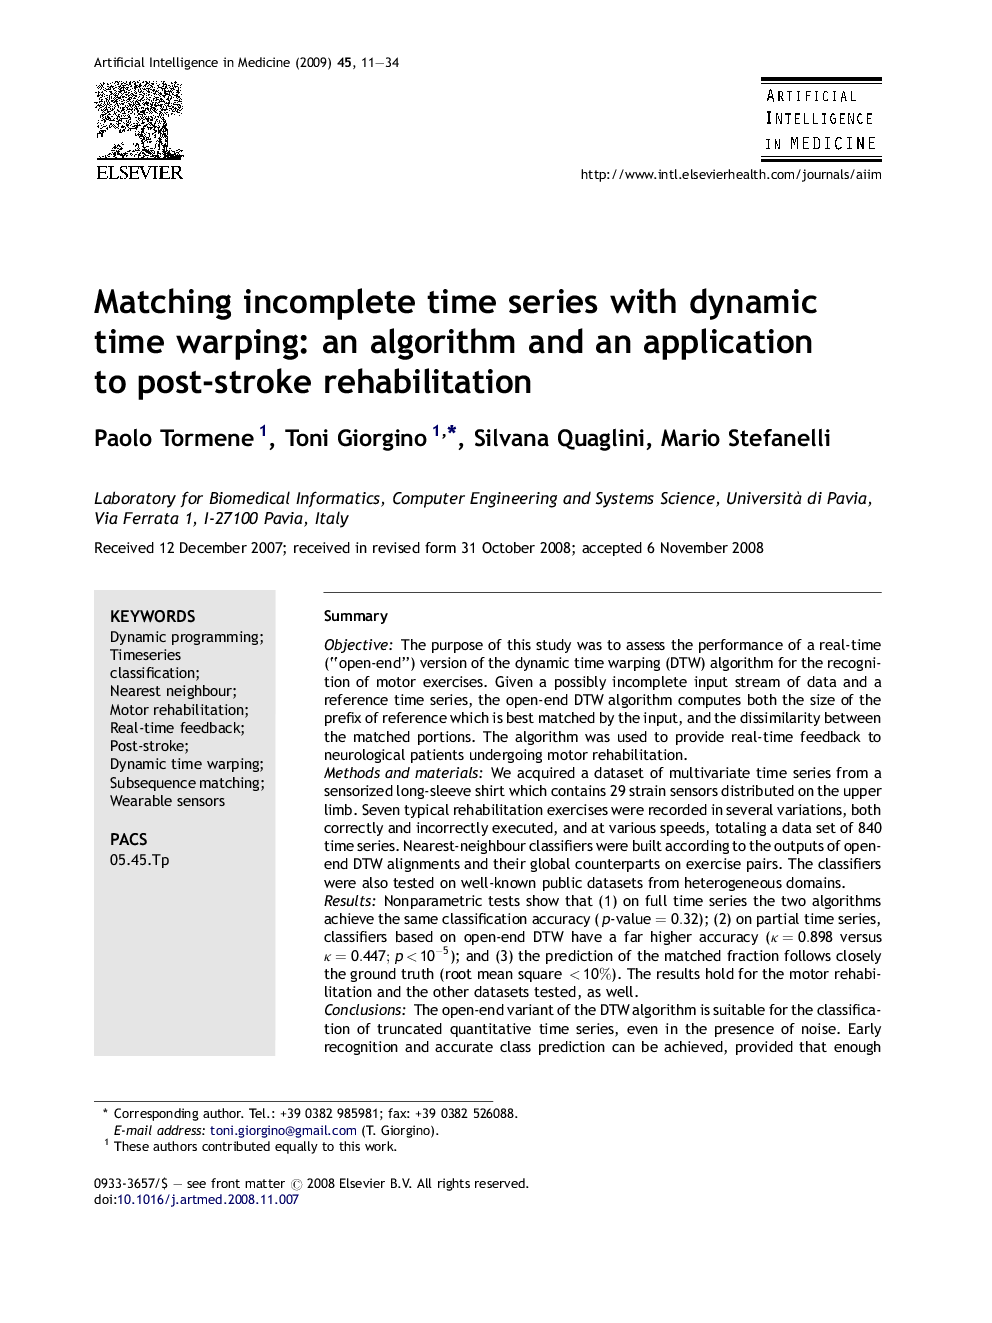 Matching incomplete time series with dynamic time warping: an algorithm and an application to post-stroke rehabilitation